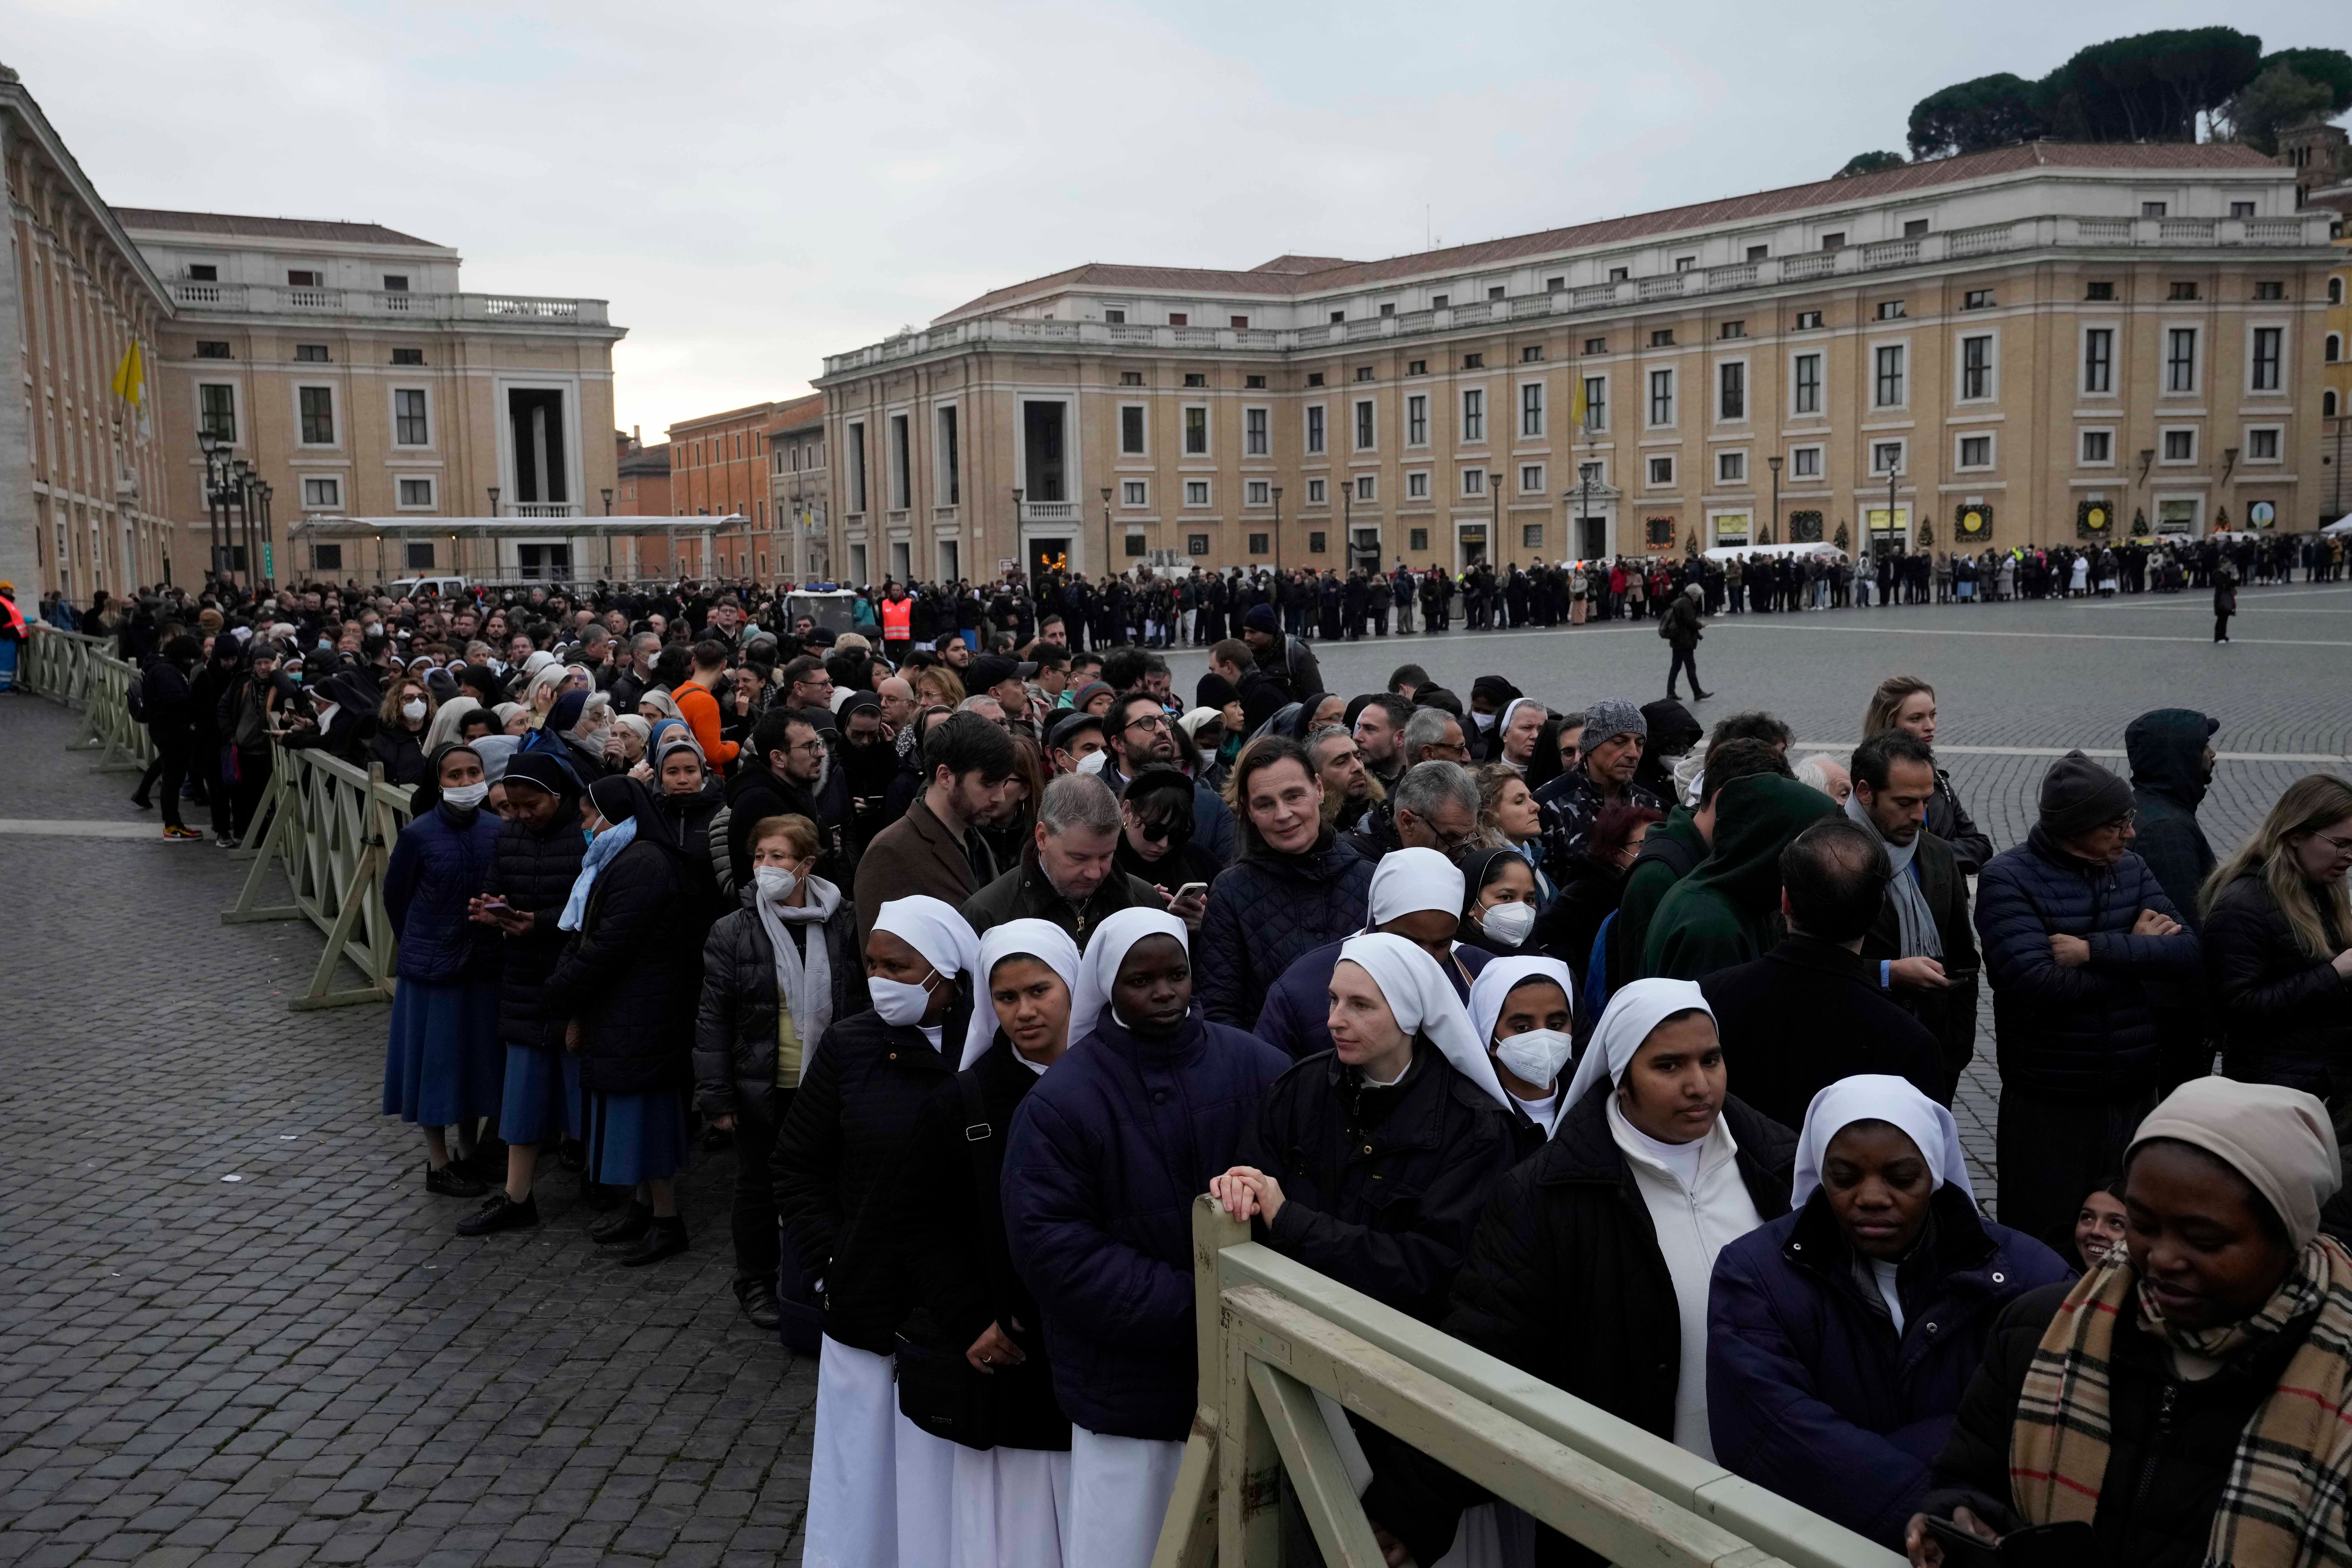 People wait in a line to enter Saint Peter’s Basilica at the Vatican